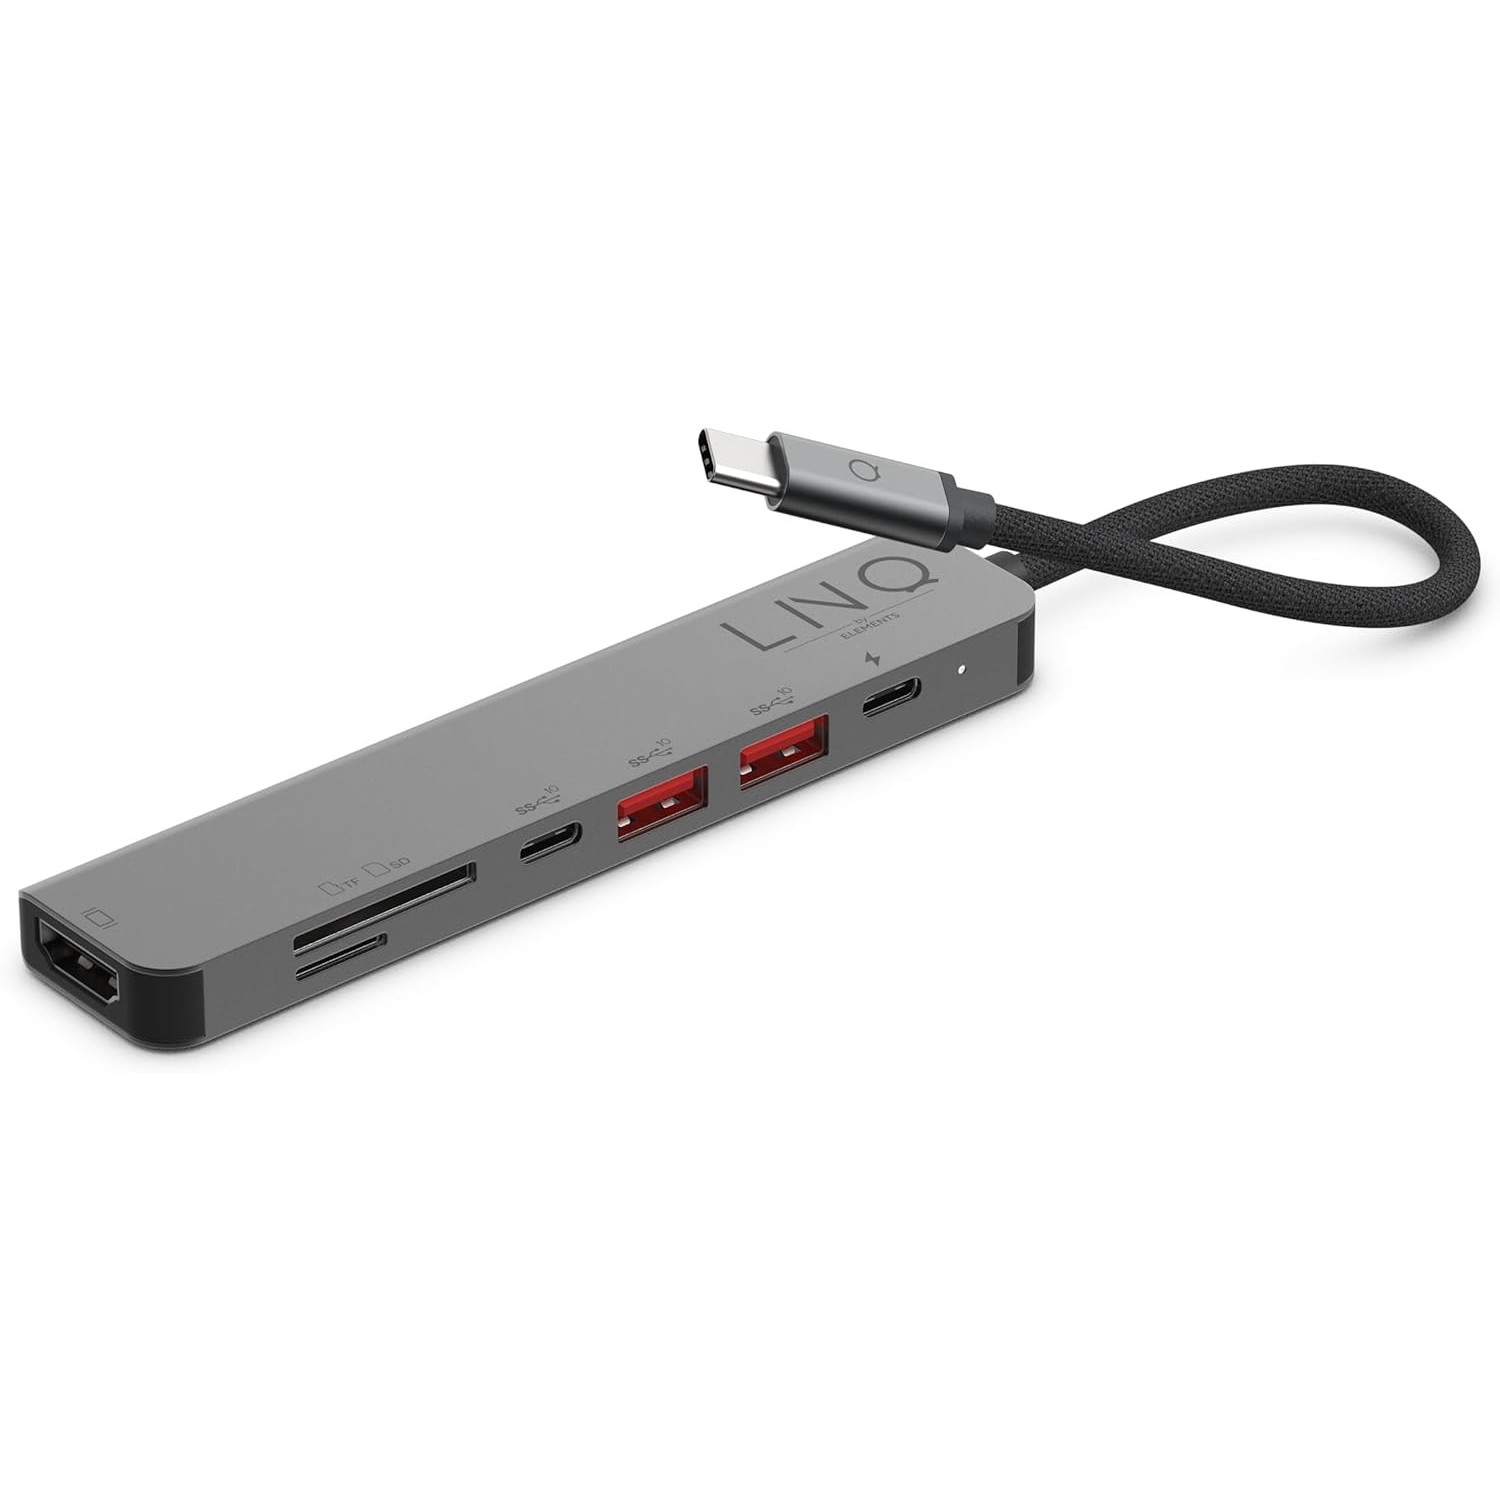 Картридеры и USB-хабы LINQ 7in1 Pro USB-C 10Gbps Multiport Hub with 4K HDMI and Card Reader